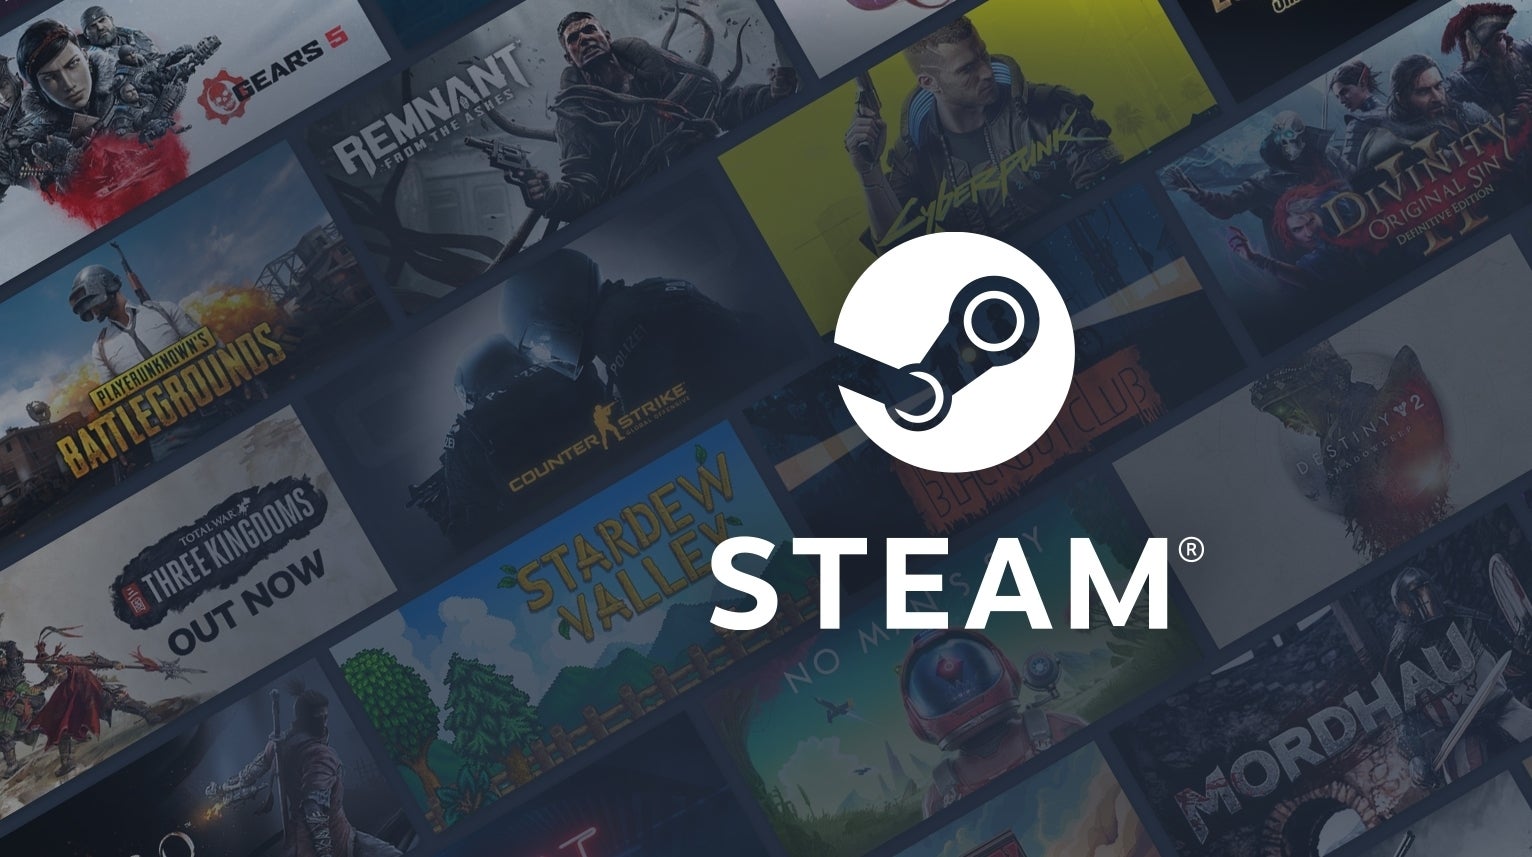 Image for Yes, Valve has broken its own concurrent Steam users record yet again